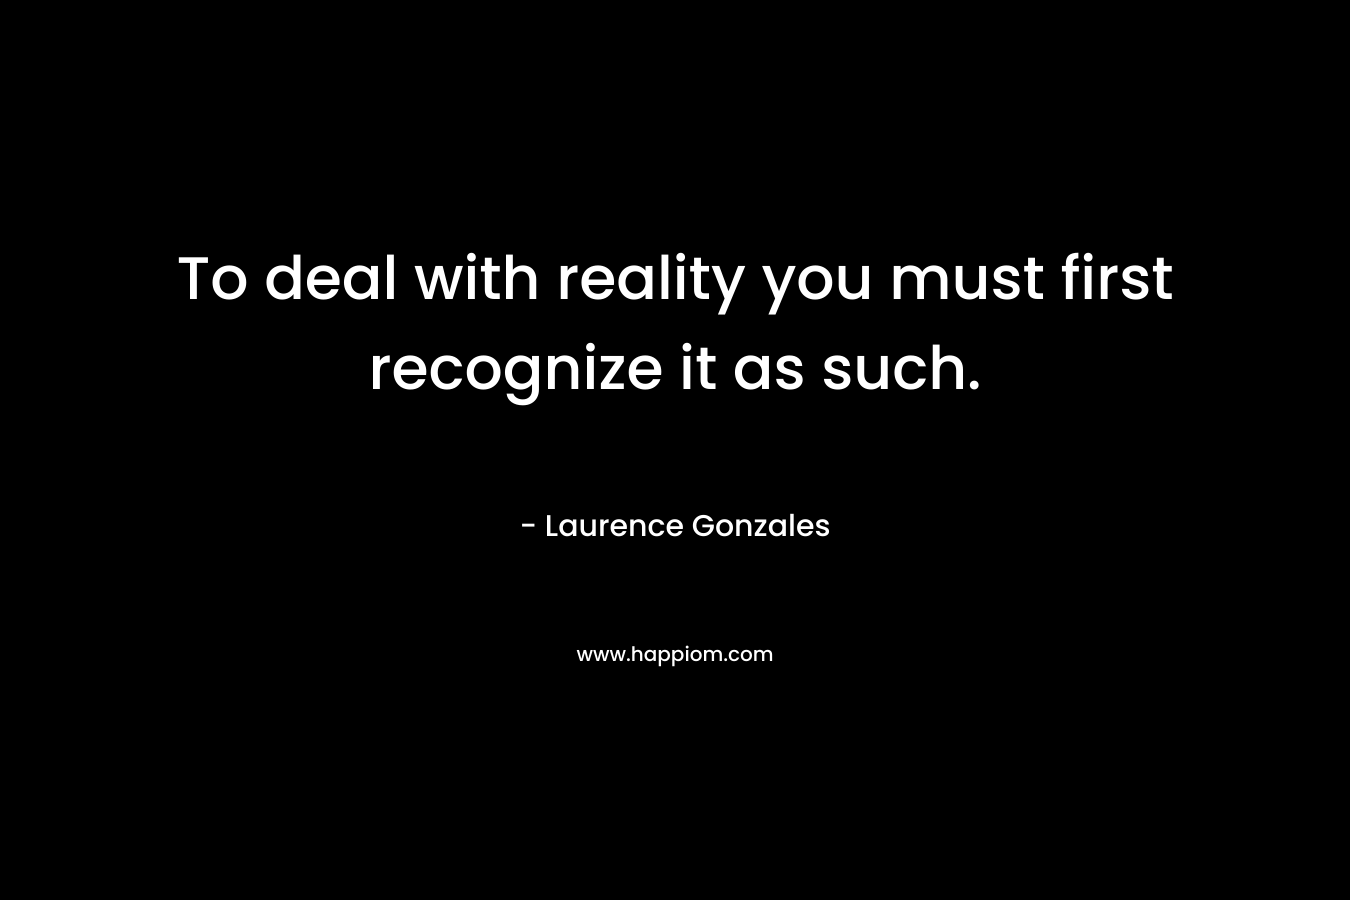 To deal with reality you must first recognize it as such. – Laurence Gonzales